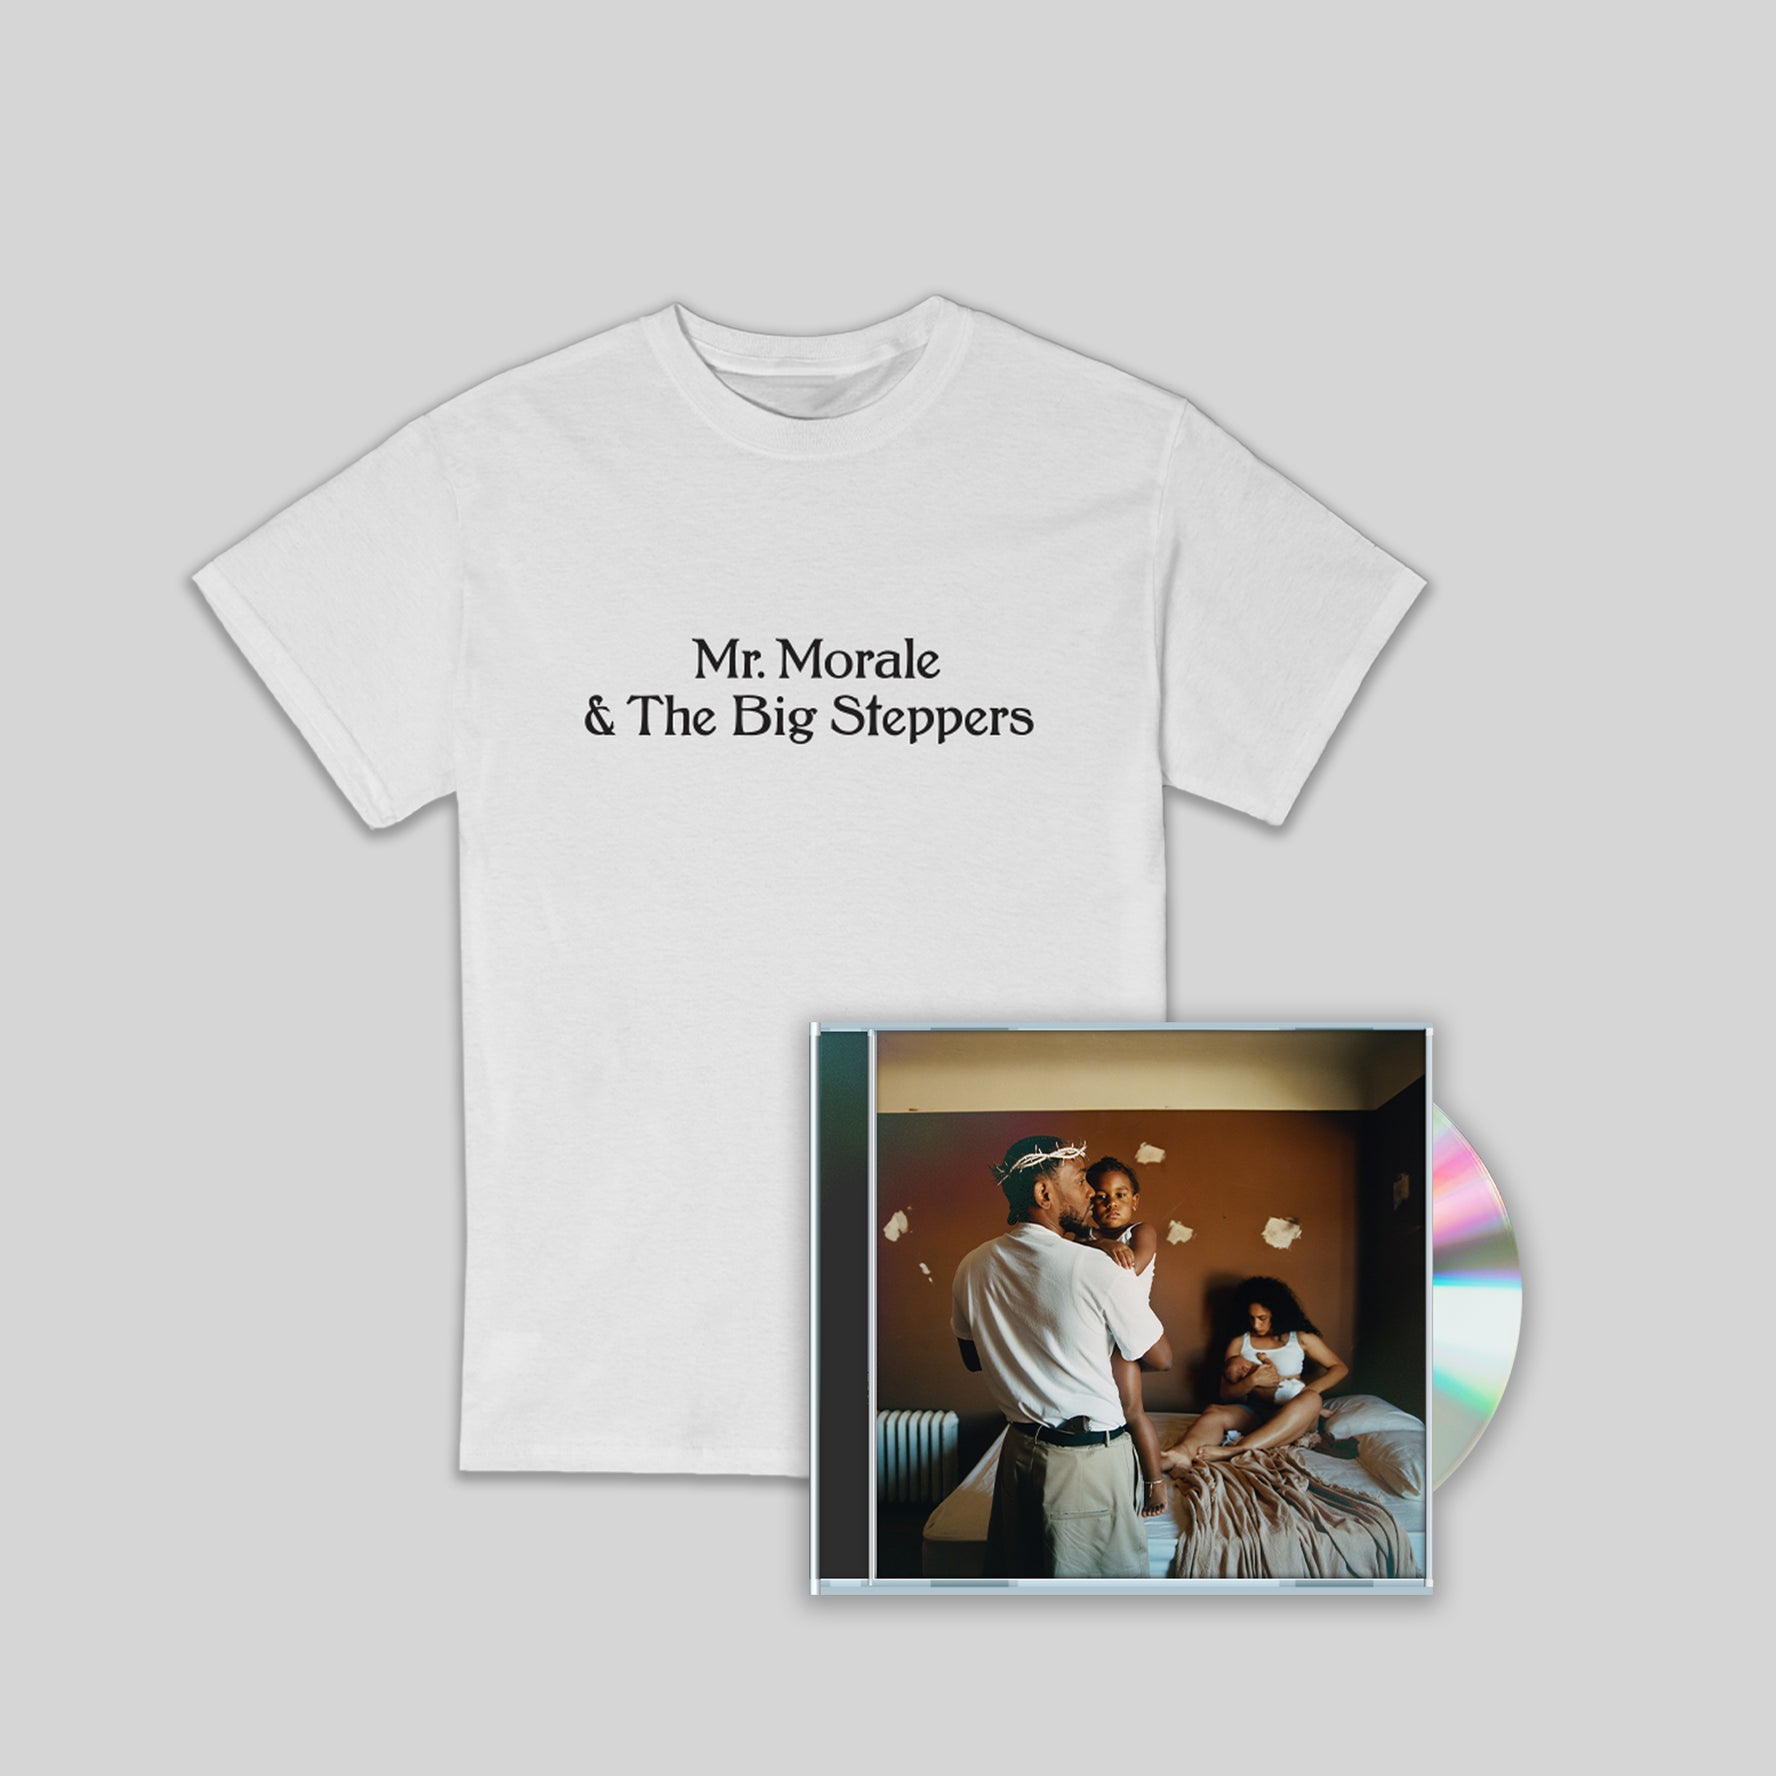 Mr. Morale & The Big Steppers (CD+Store Exclusive White T-Shirt)